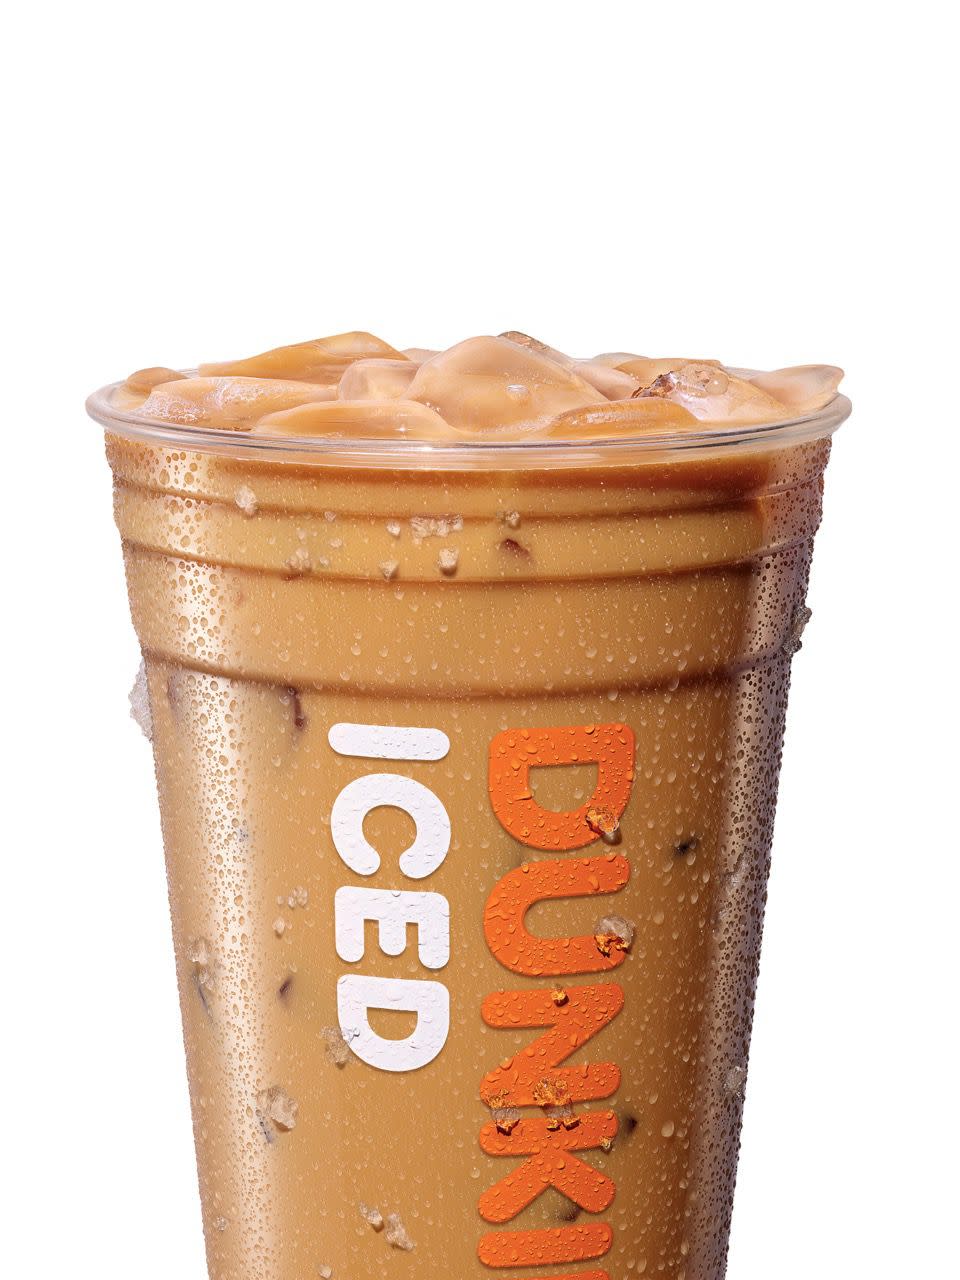 Dunkin' Retail 23 Window 5 Retouched Product Image: Nutty Pumpkin Iced Coffee; branded plastic cup (tight crop)
(image + shadow + white background/transparency)